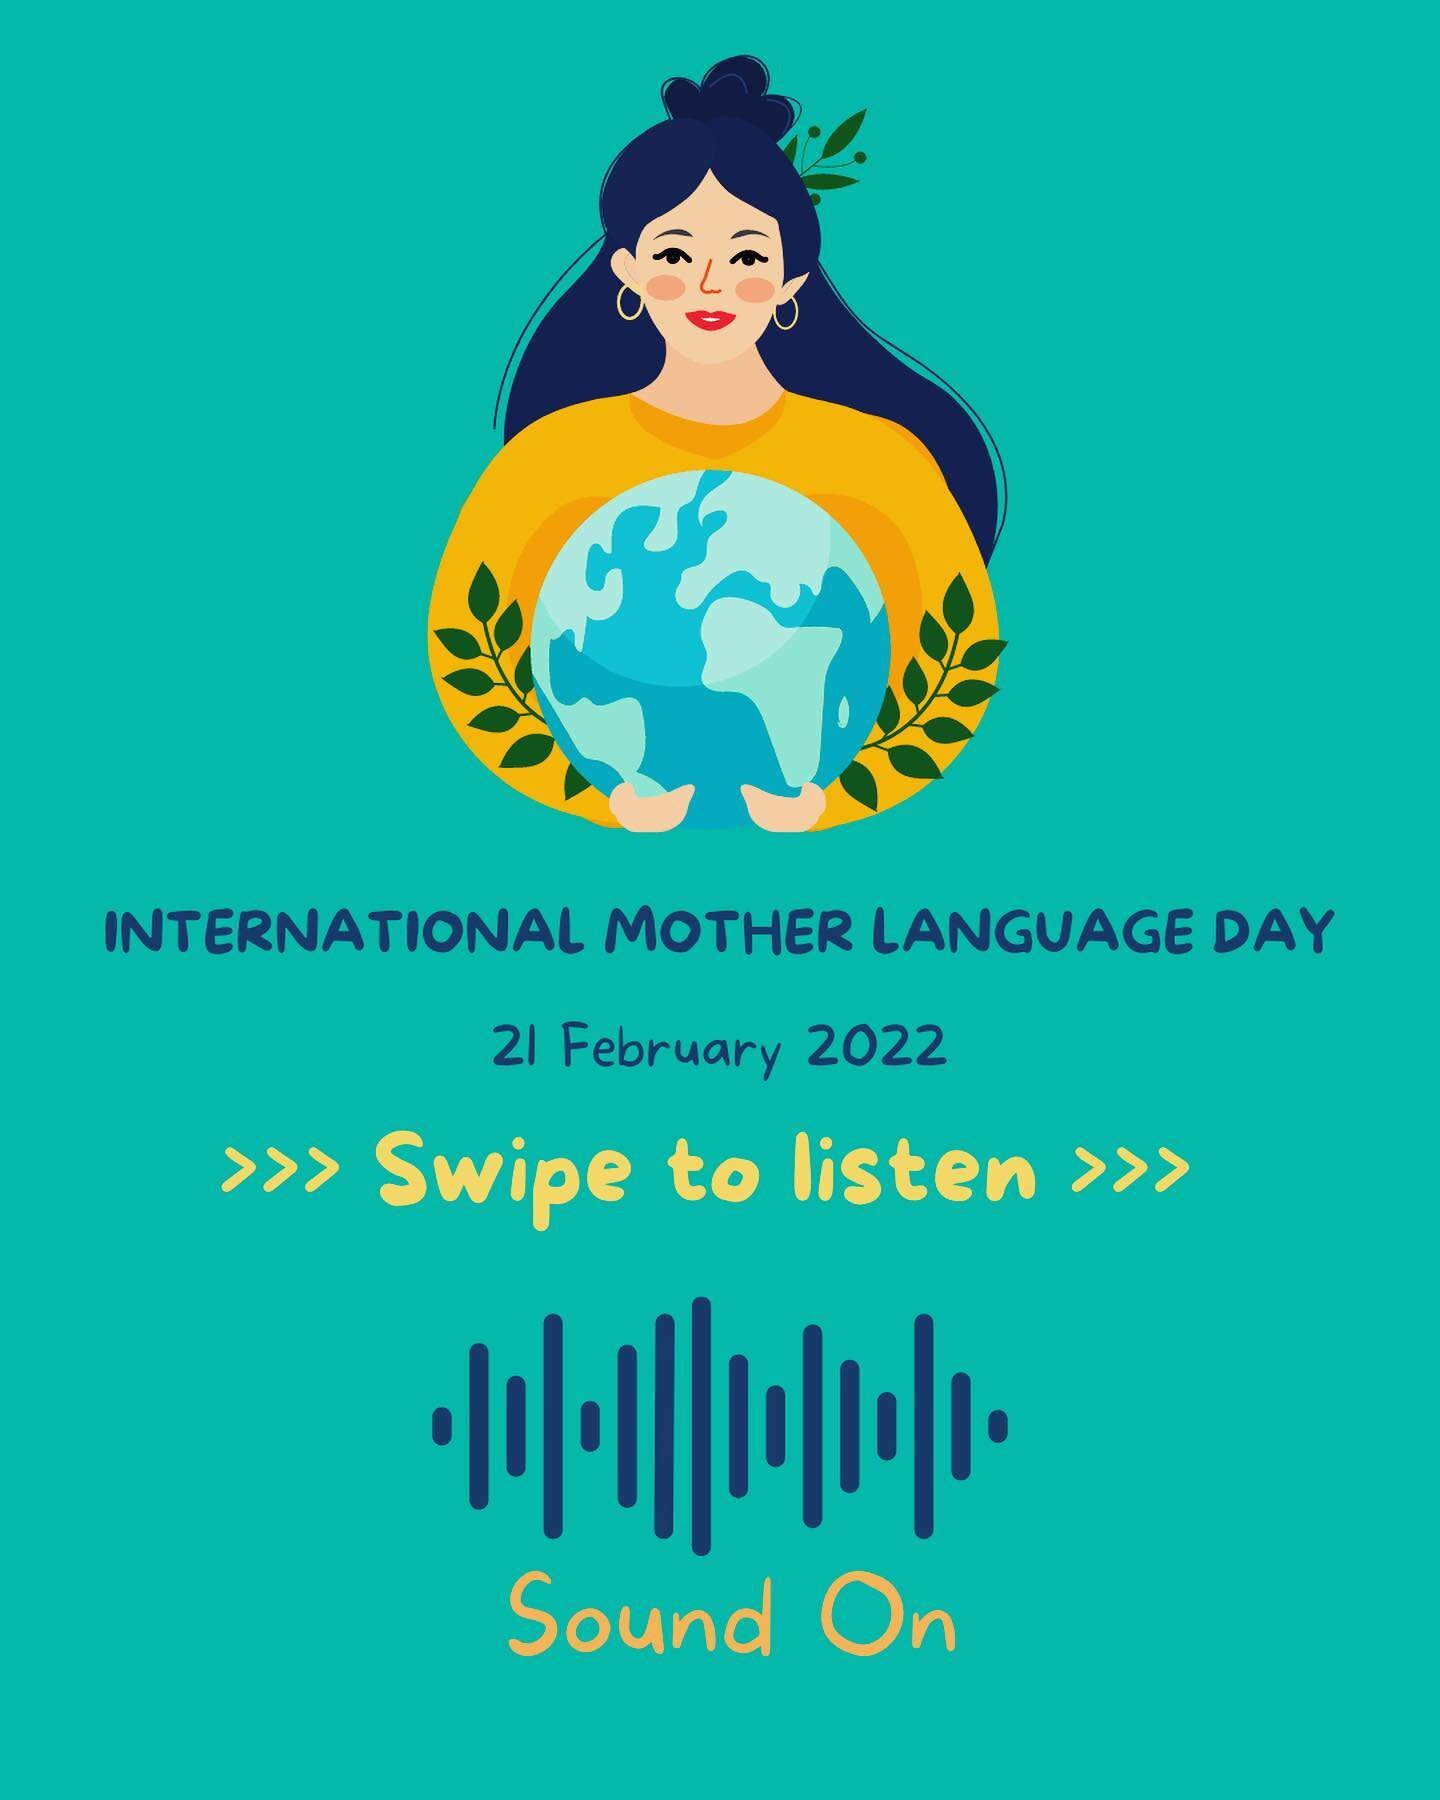 Happy International Mother Language Day!
Here are some poems read by us and by some of our family and friends in our Mother languages. (5 languages) &lt;sound on&gt; swipe to listen